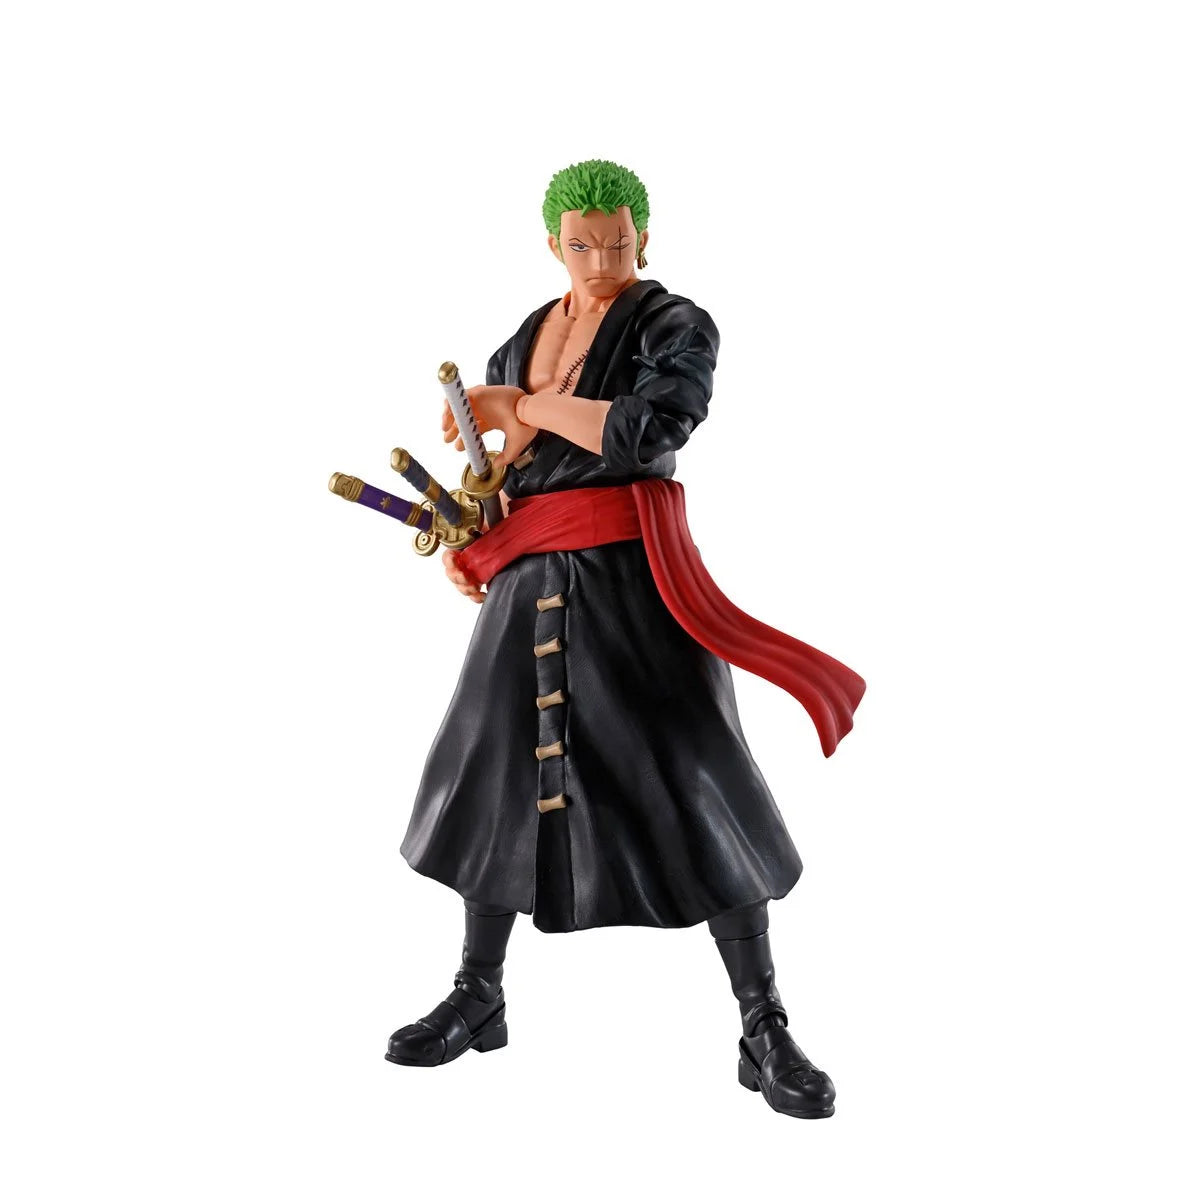 Shop One Piece  Toys, Bobbleheads, Statues & Collectibles in India